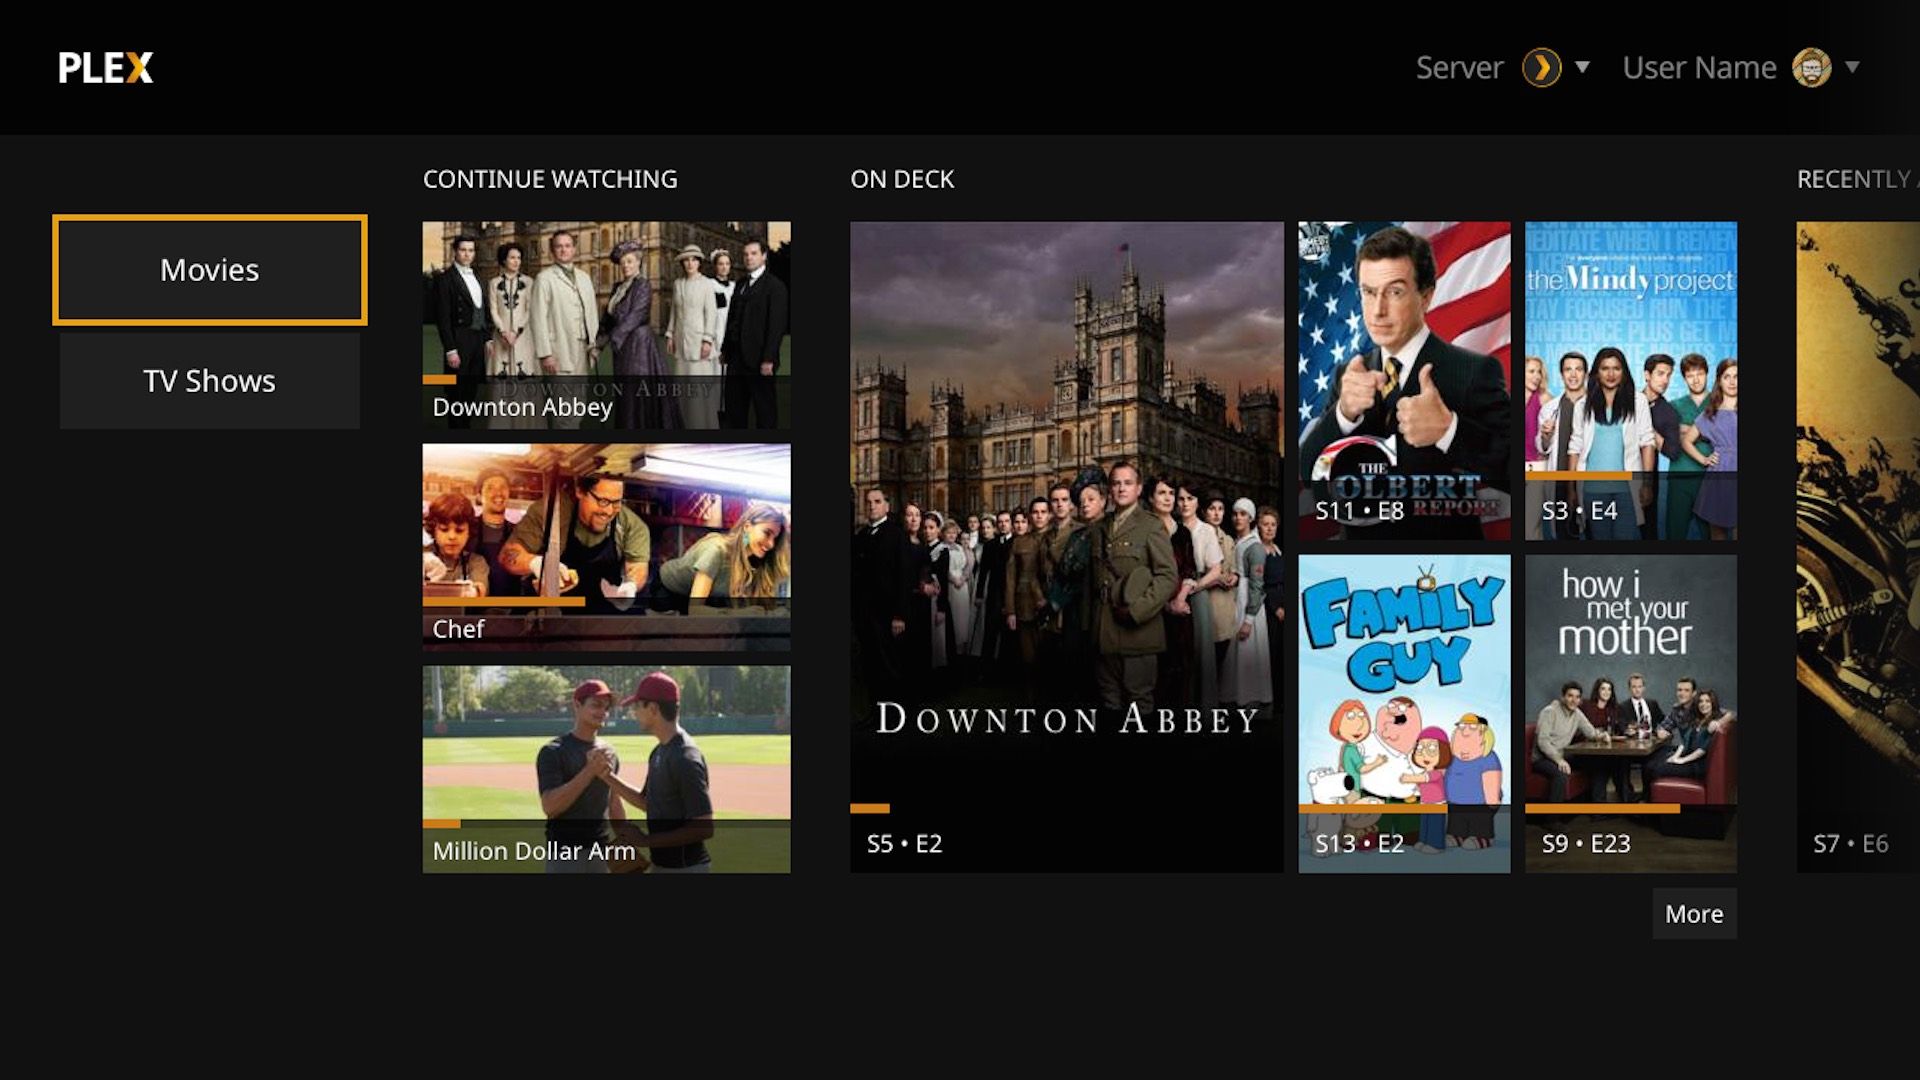 ps4 finally gets home video streaming but from plex not sony image 2